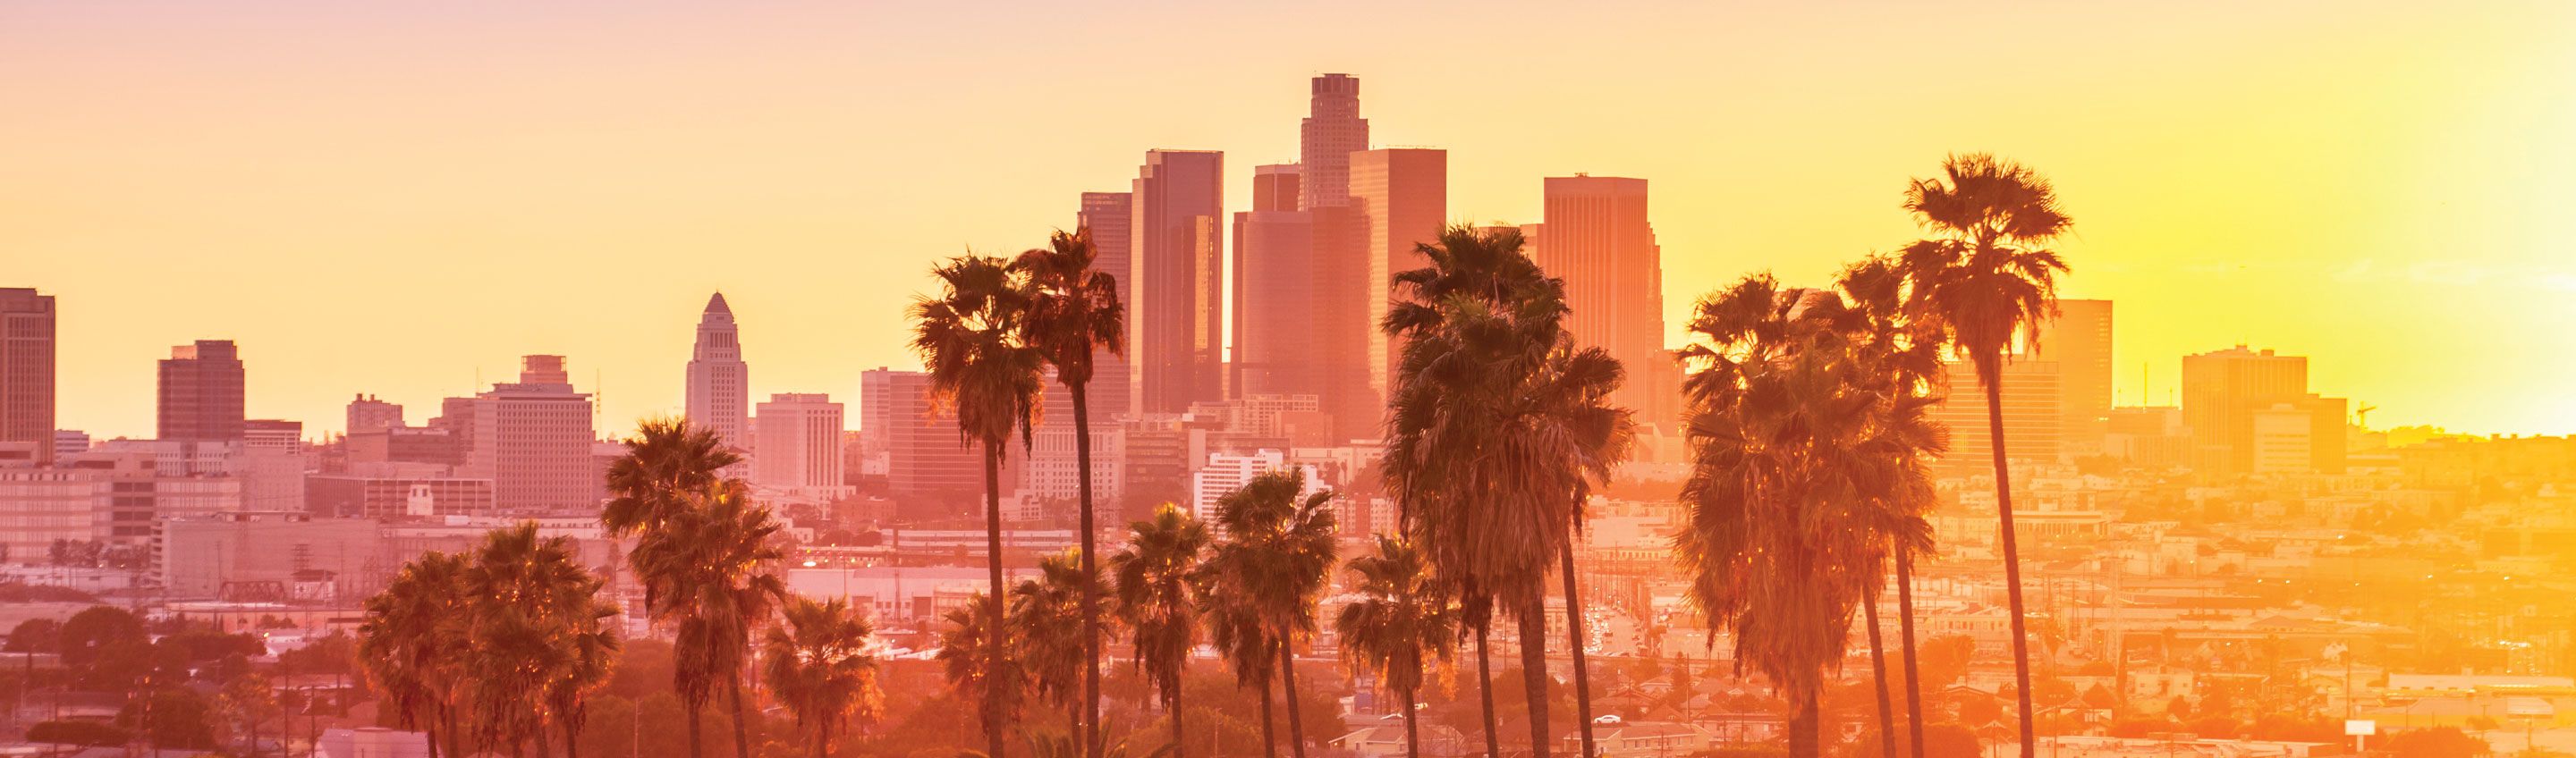 sunny golden hue over skyline of los angeles with palm trees